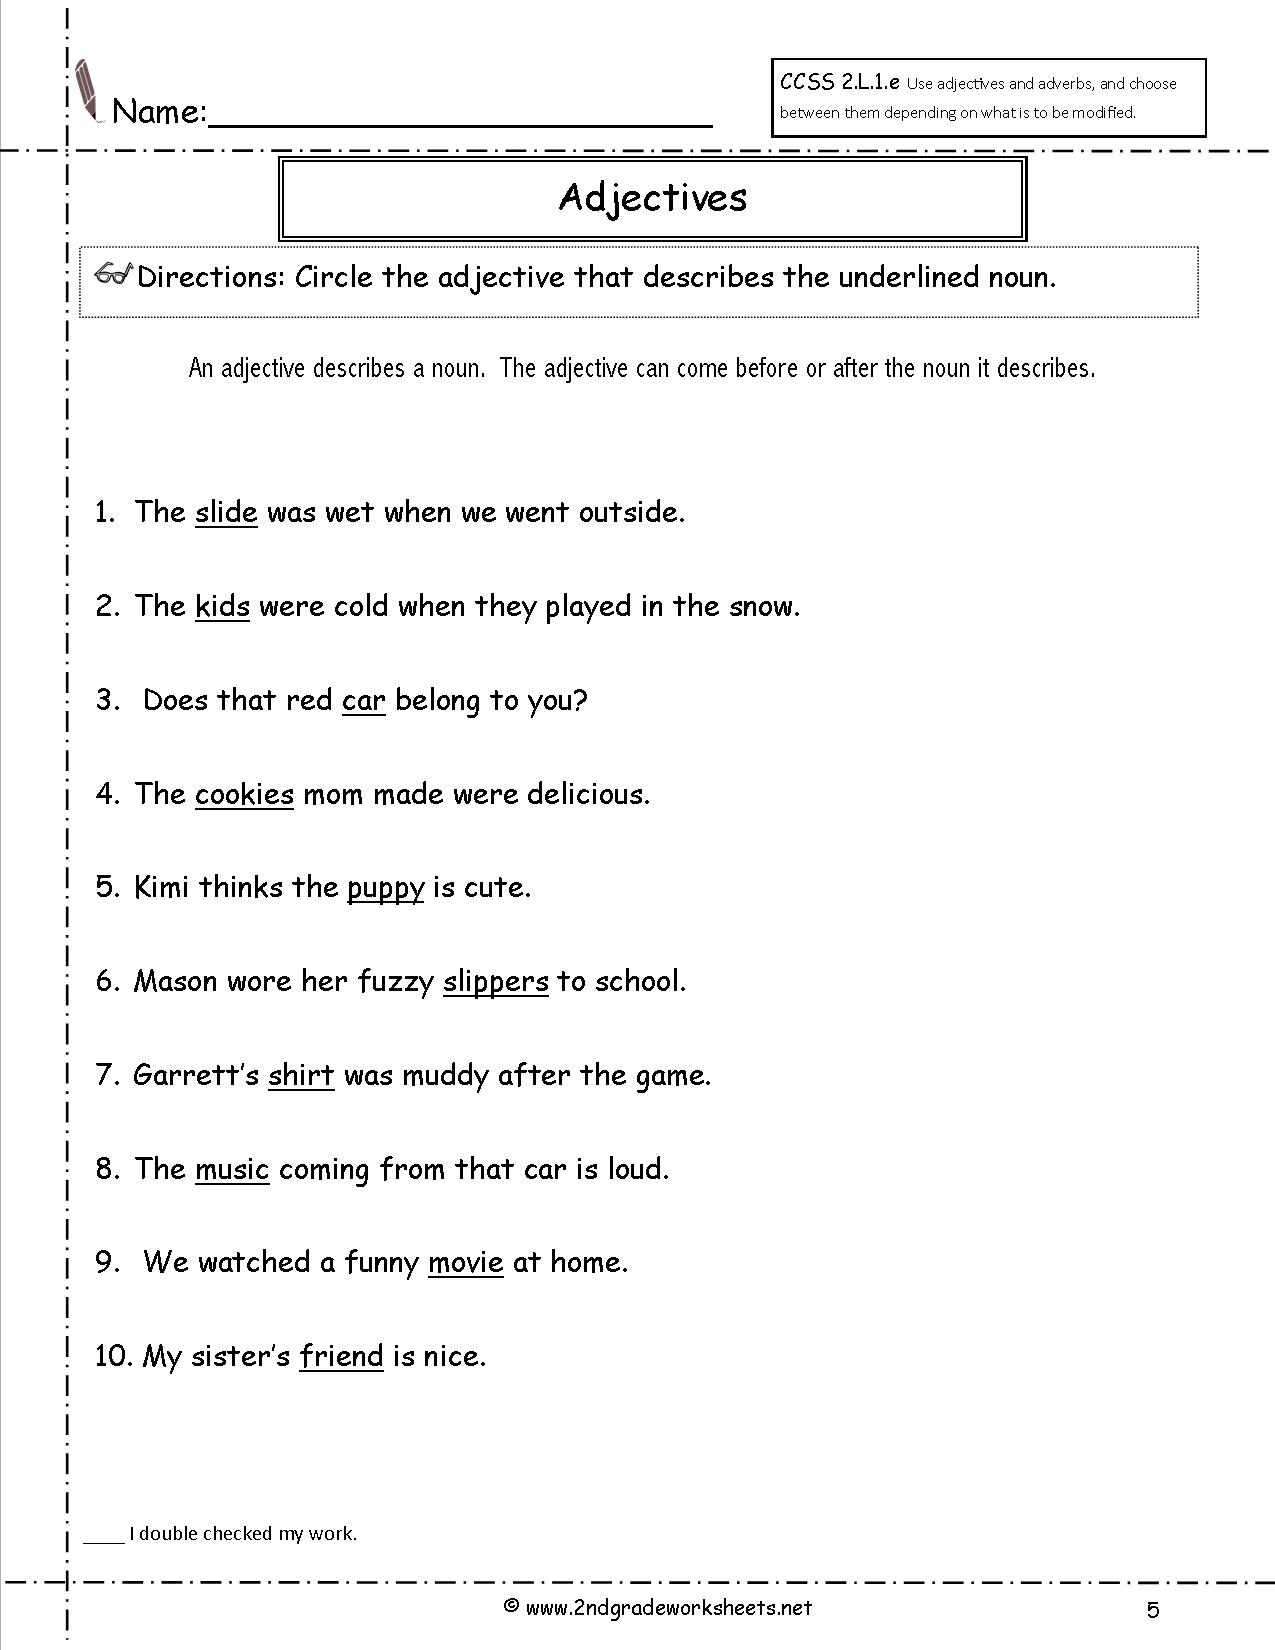 linking-and-helping-verbs-worksheet